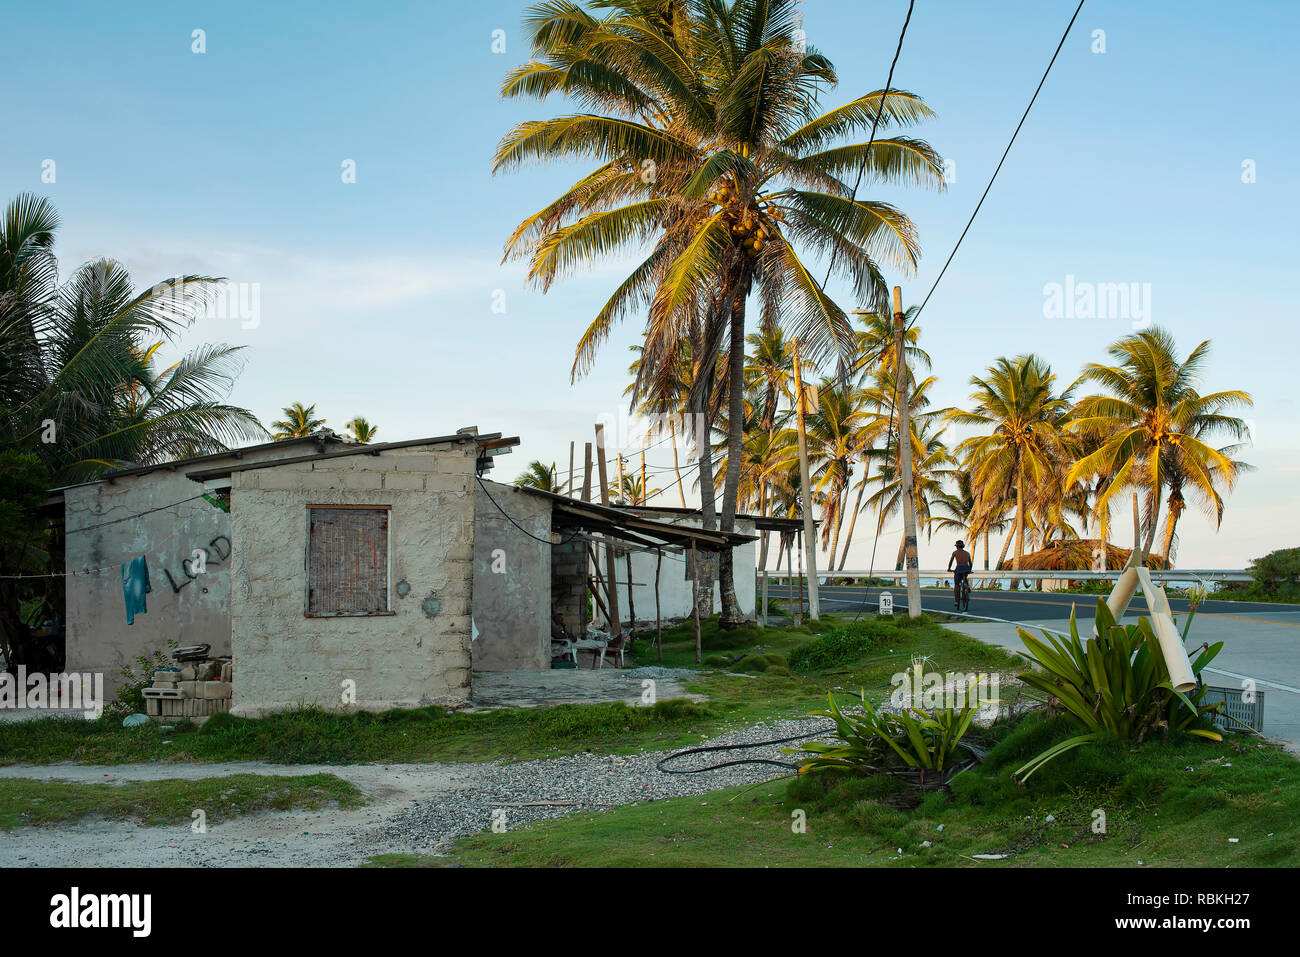 Caribbean residential buildings of lower class settlement along the coastal highway of San Andrés island, Colombia. Oct 2018 Stock Photo